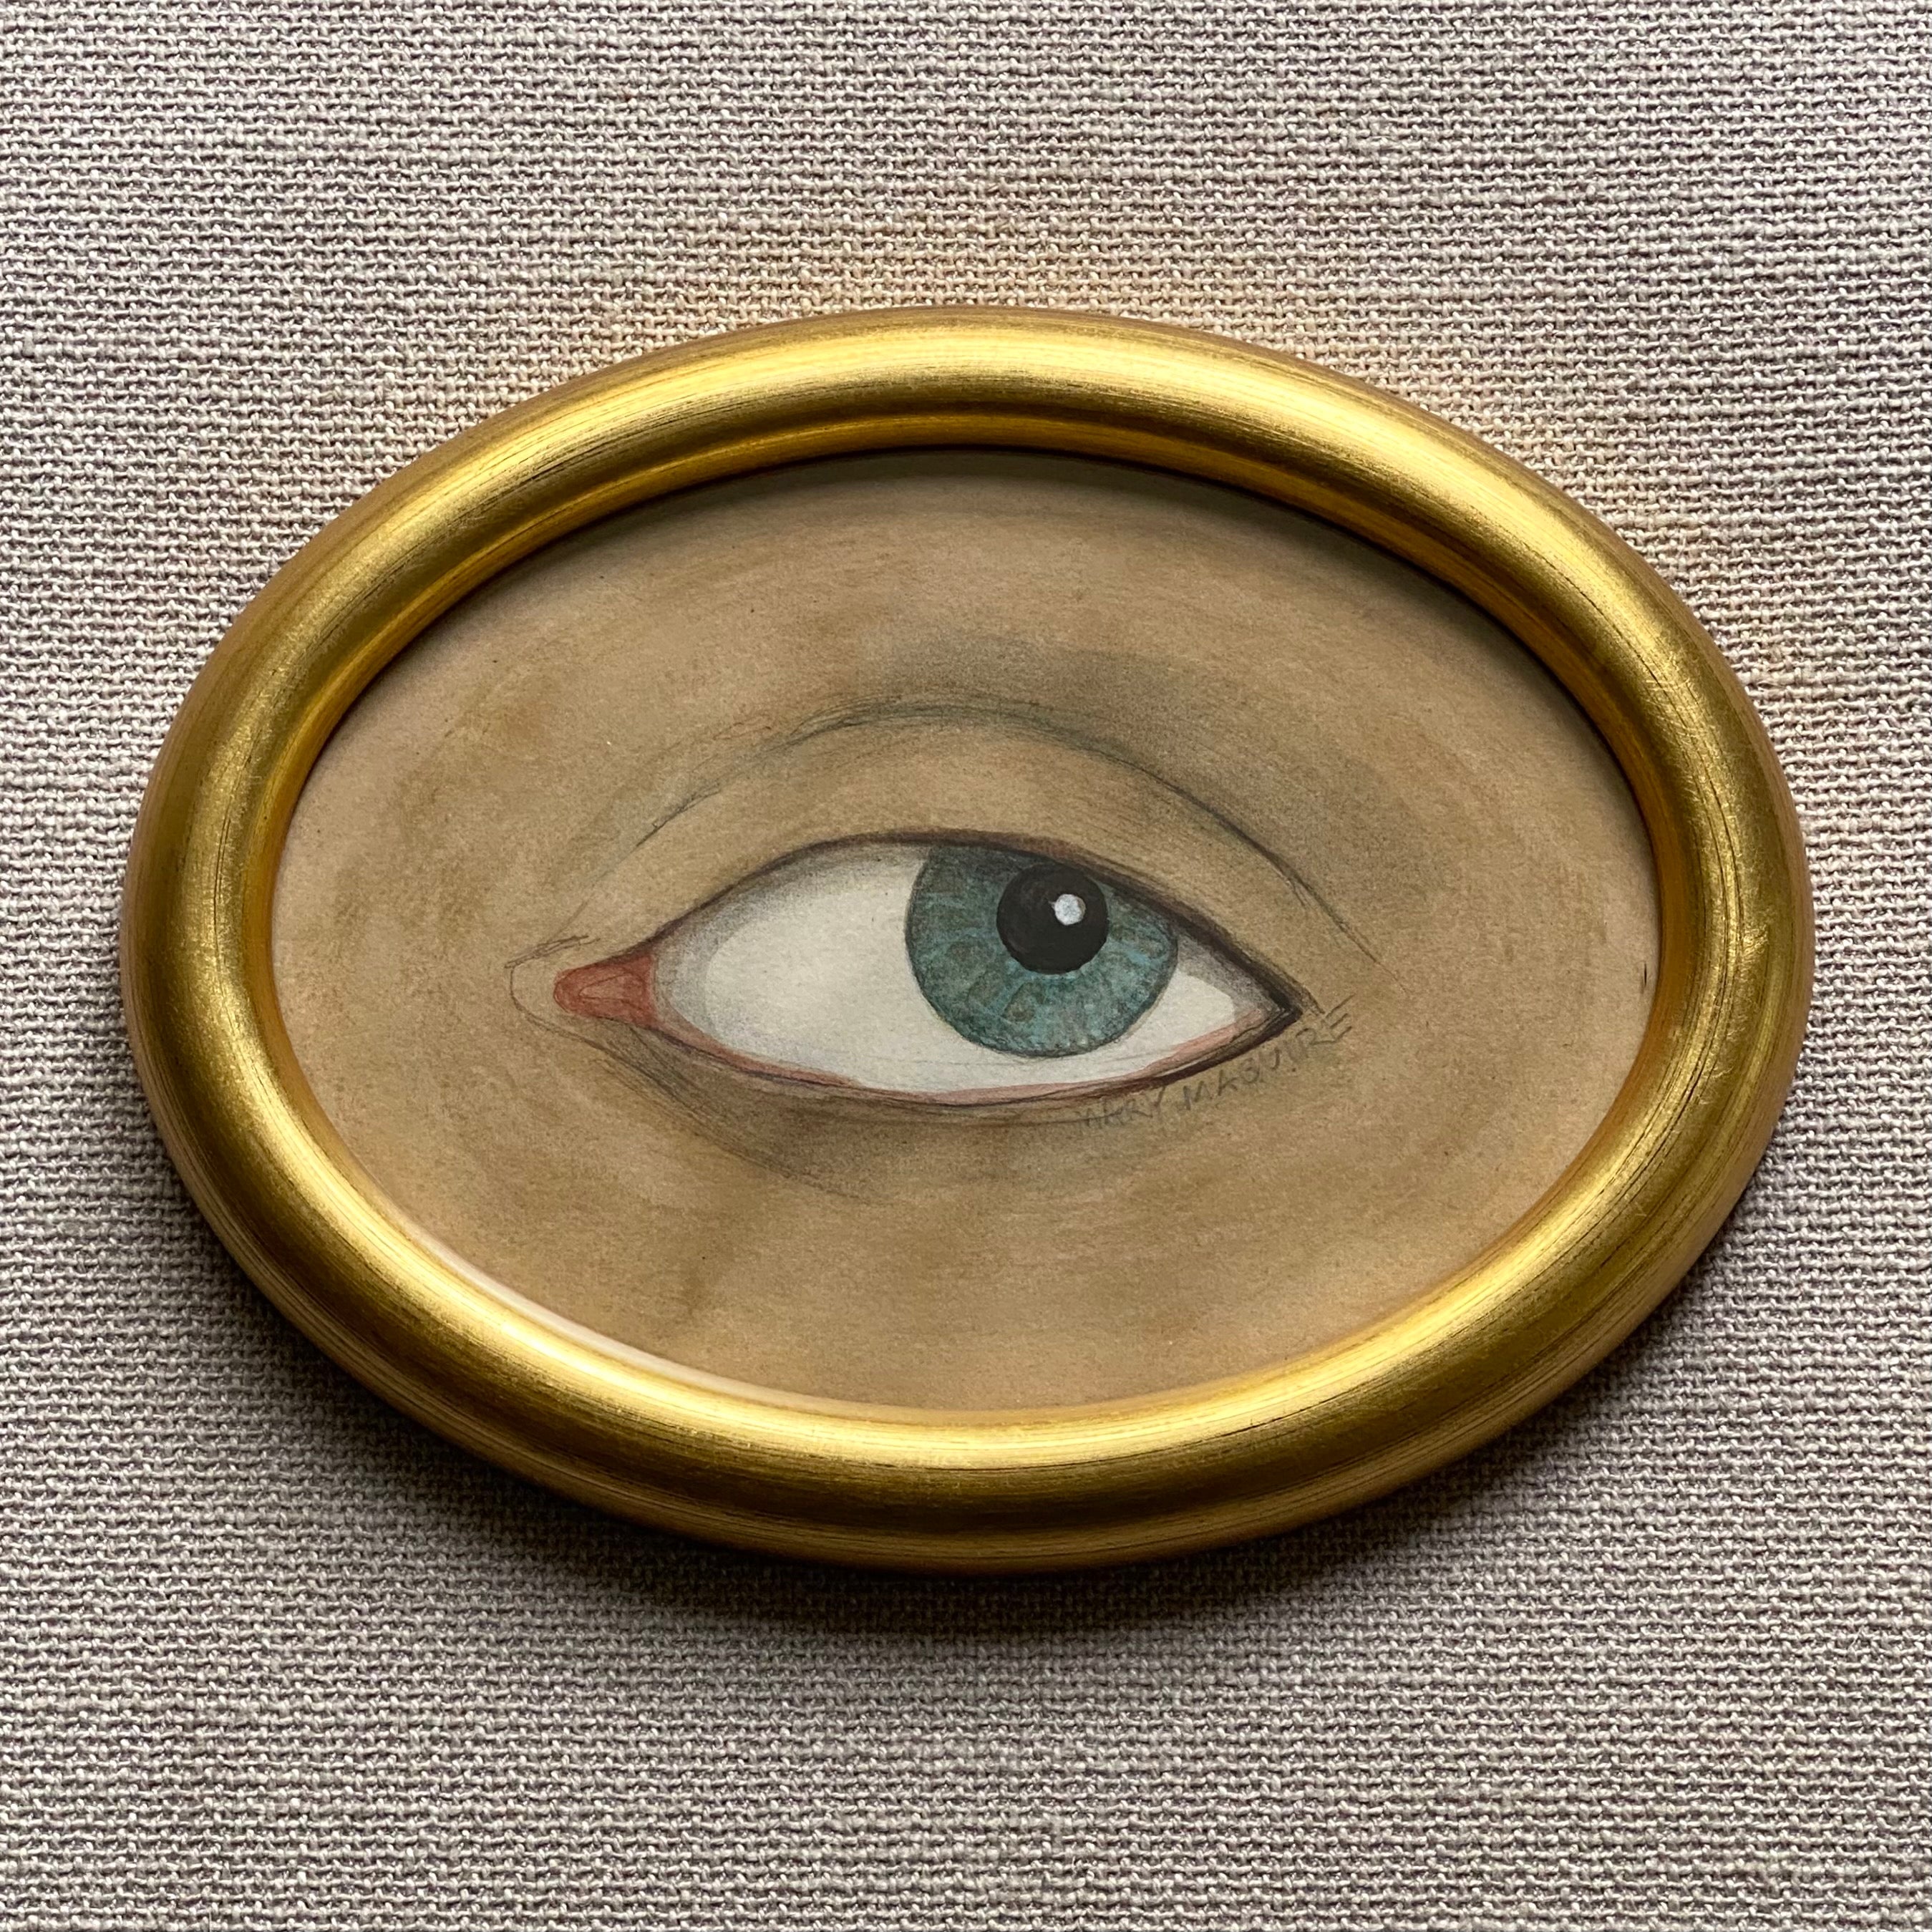 'Lover's Eye' -6 x 8 inches- per piece